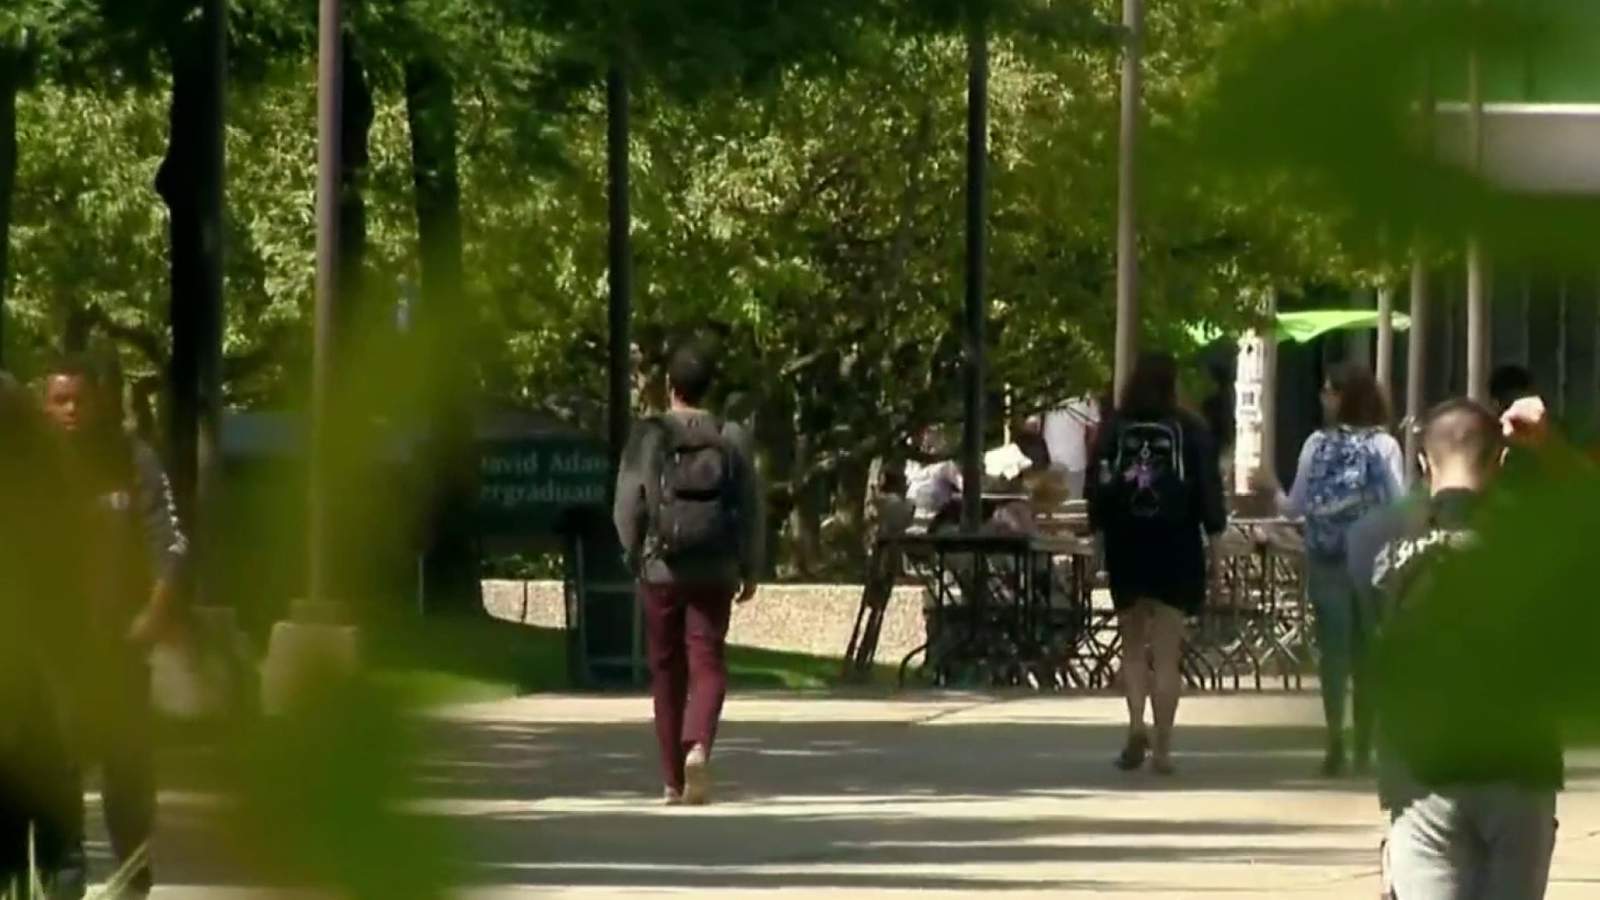 Michigan offers free community college tuition to residents 25 and older -- Here’s how to apply